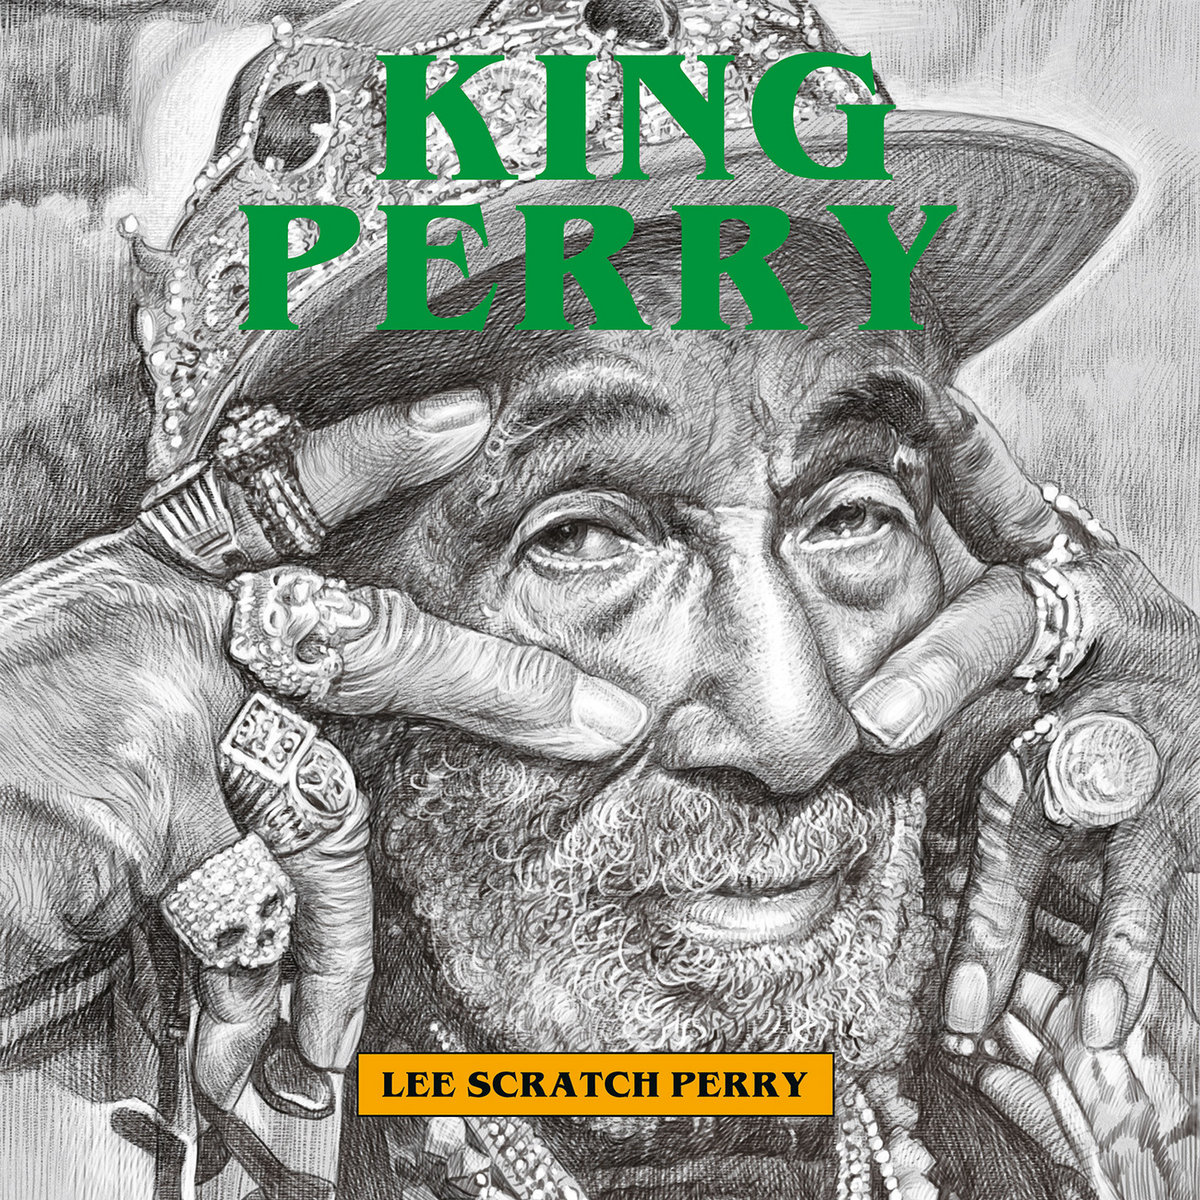 Listen Up – Lee “Scratch” Perry – King Perry